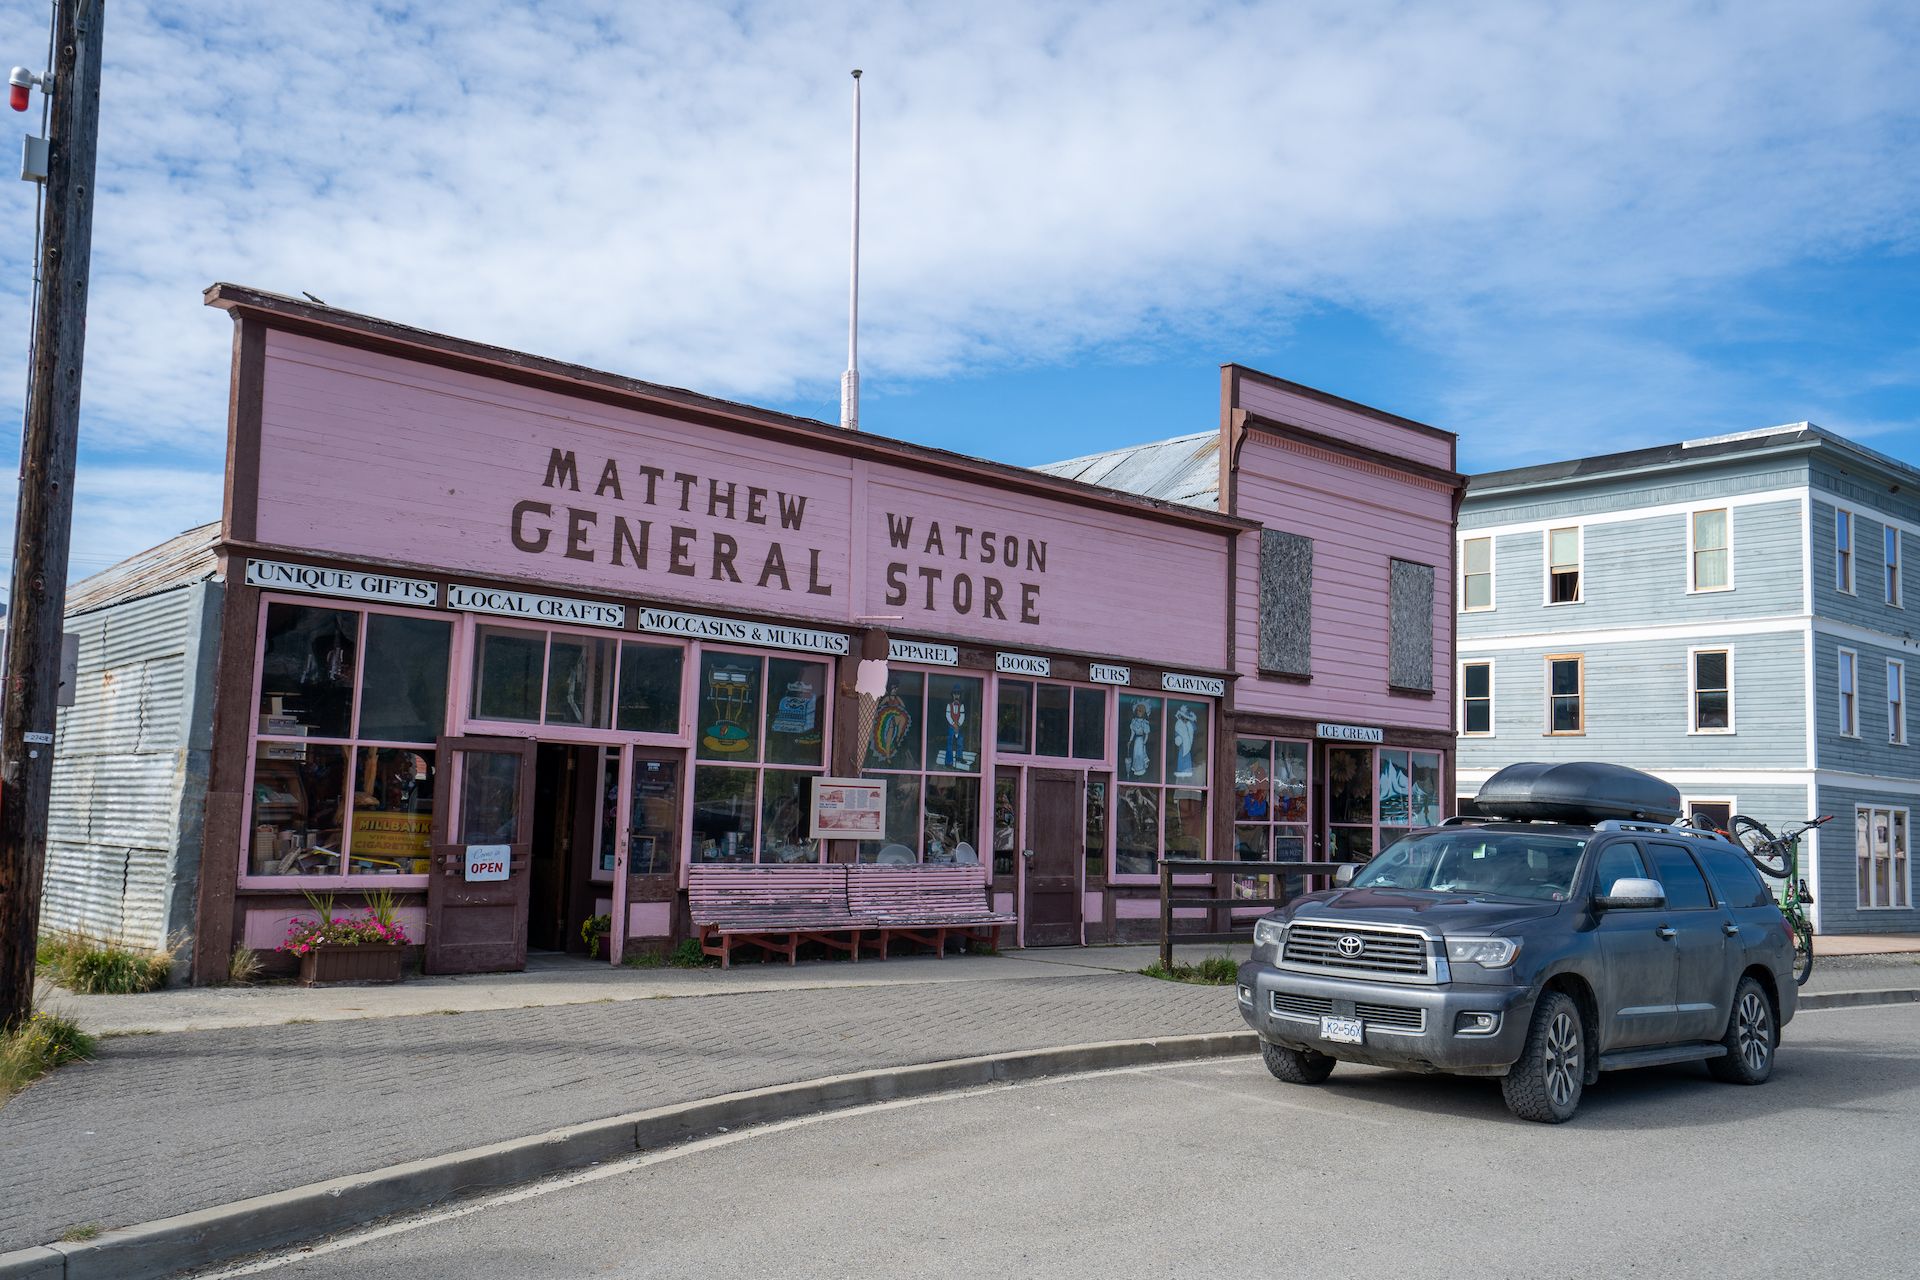 This store claims to be the oldest operating general store in Yukon.